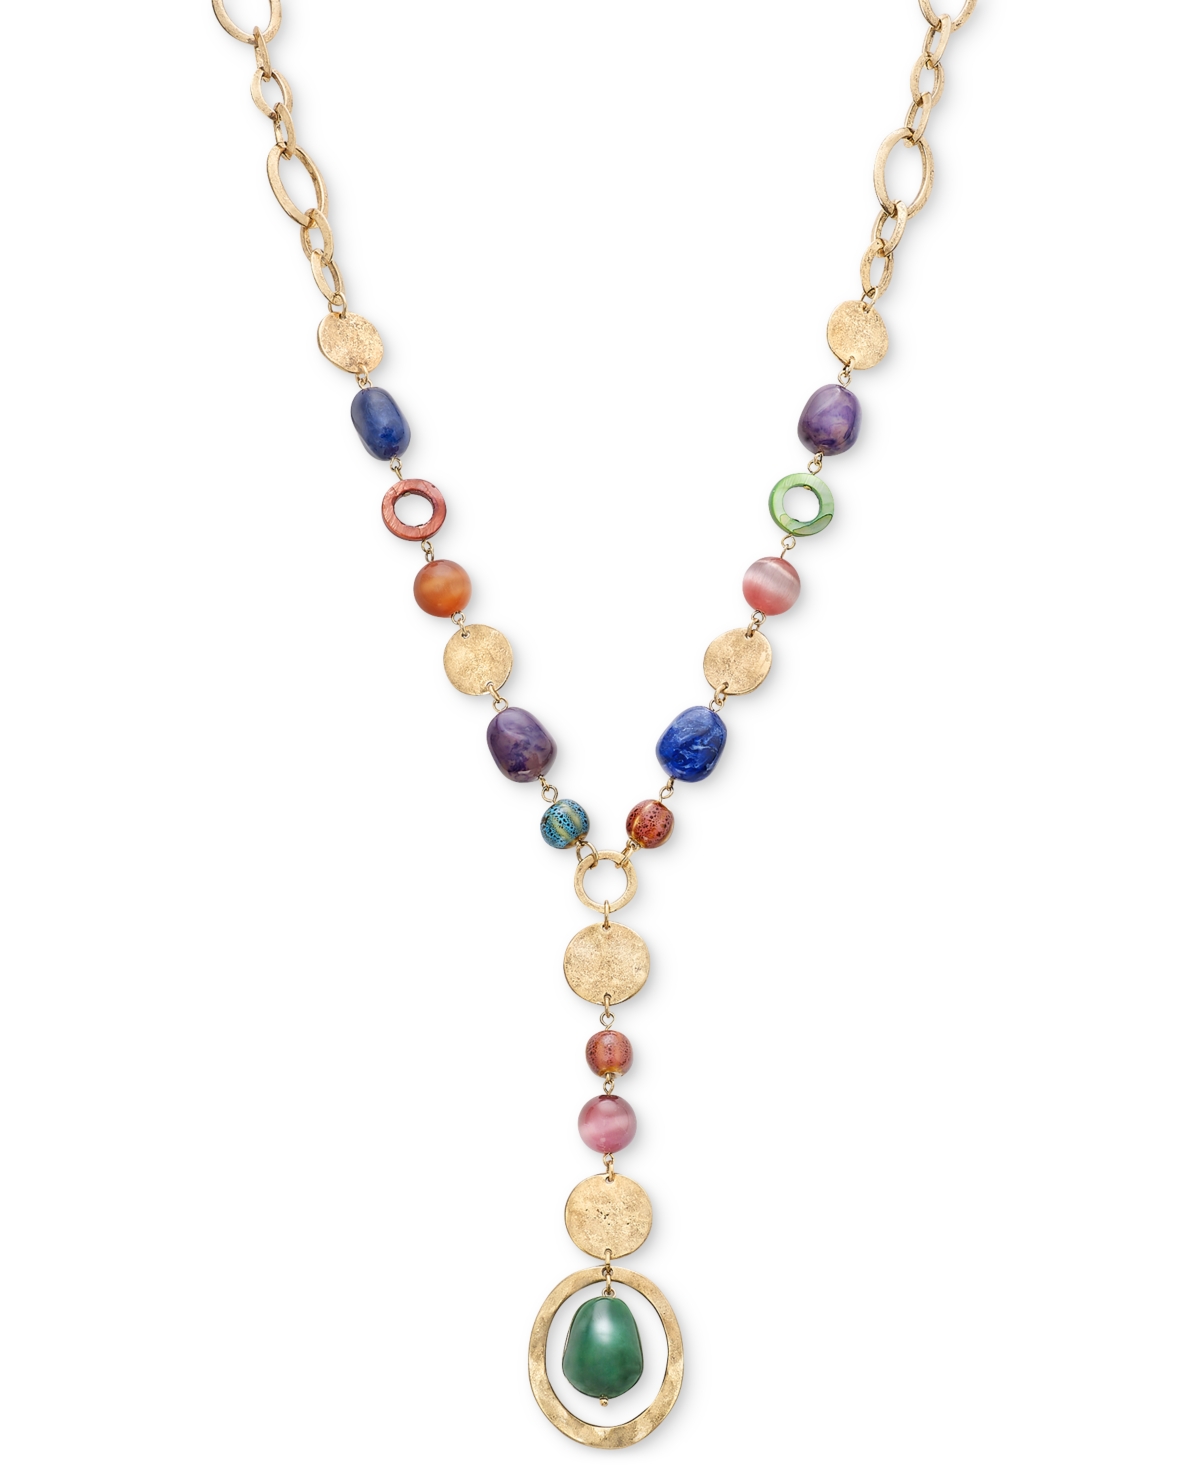 Mixed Stone Long Lariat Necklace, 30" + 3" extender, Created for Macy's - Multi